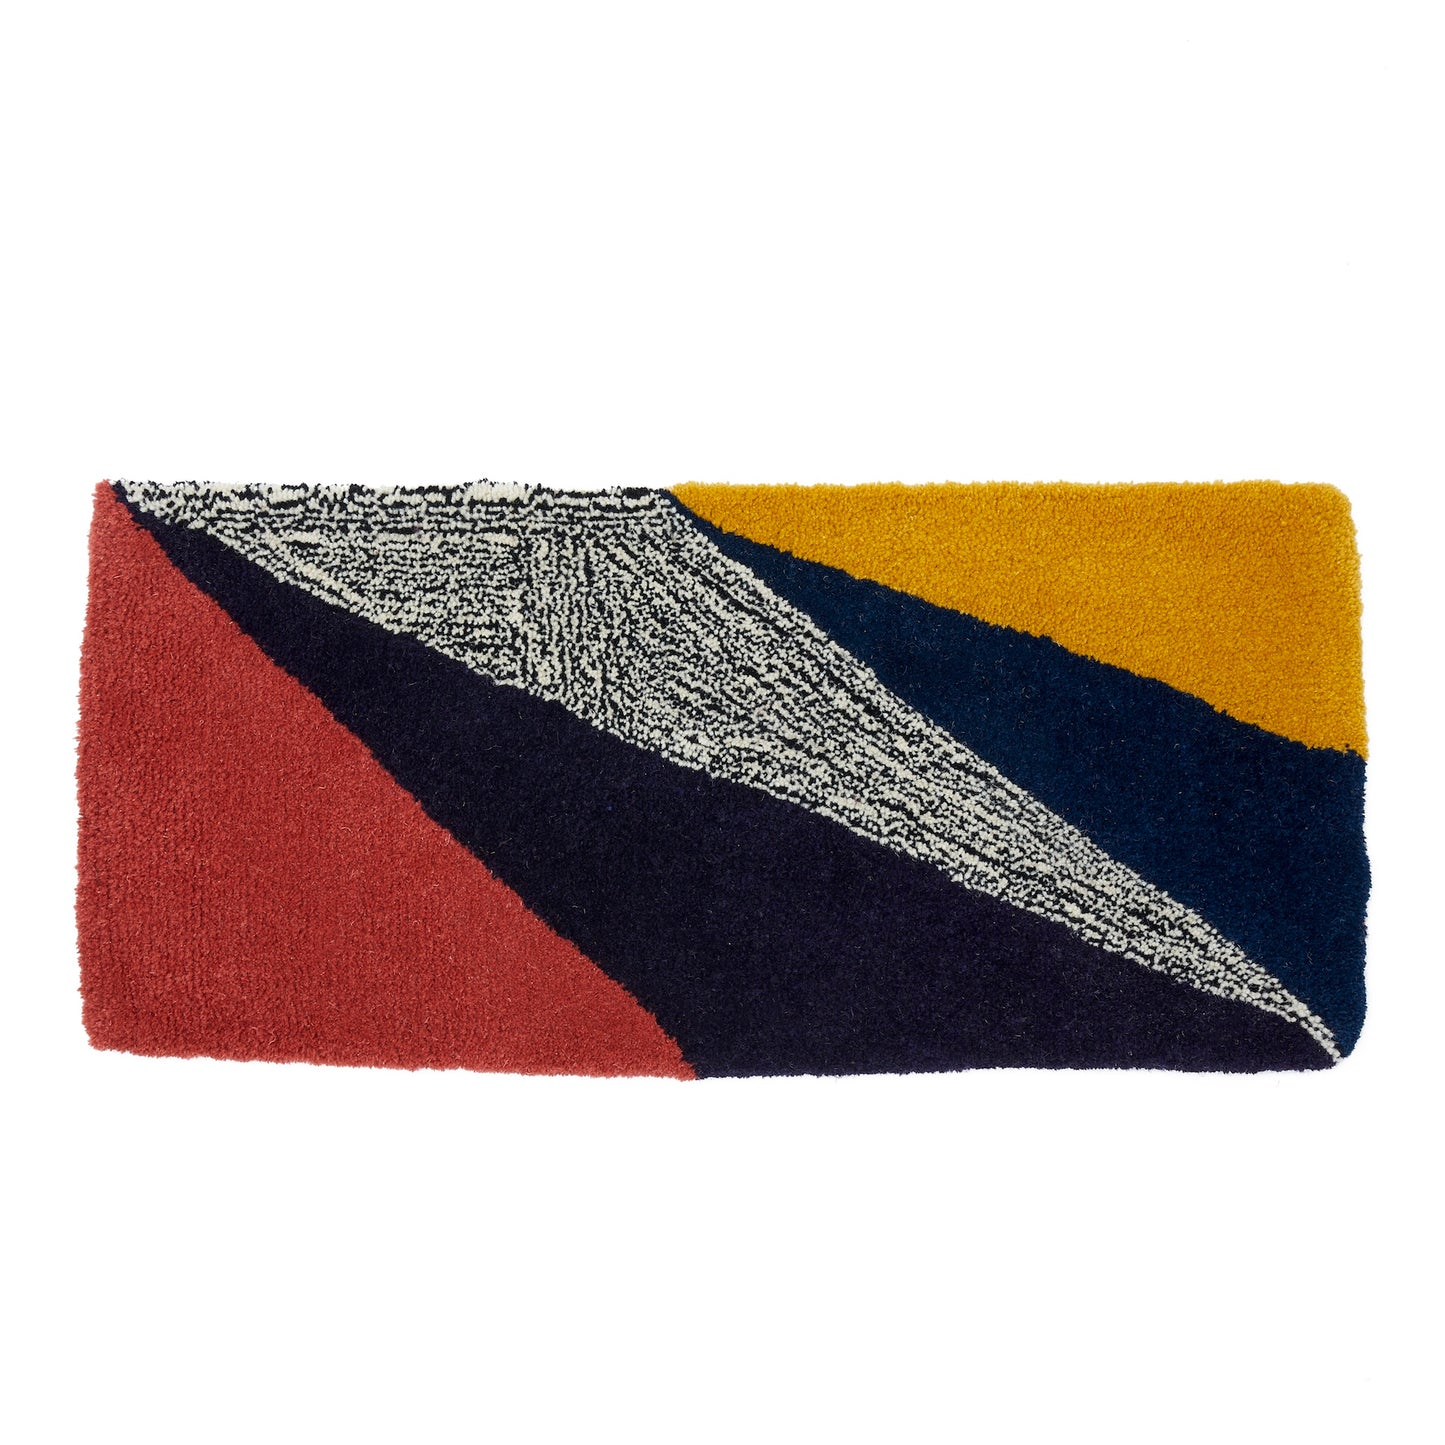 Handmade rug runner created using reclaimed yarns. Using Triangular fragments in Coral, Purple, Black and White flecks, Navy and Yellow with a hand bound dusky coral/pink edge.